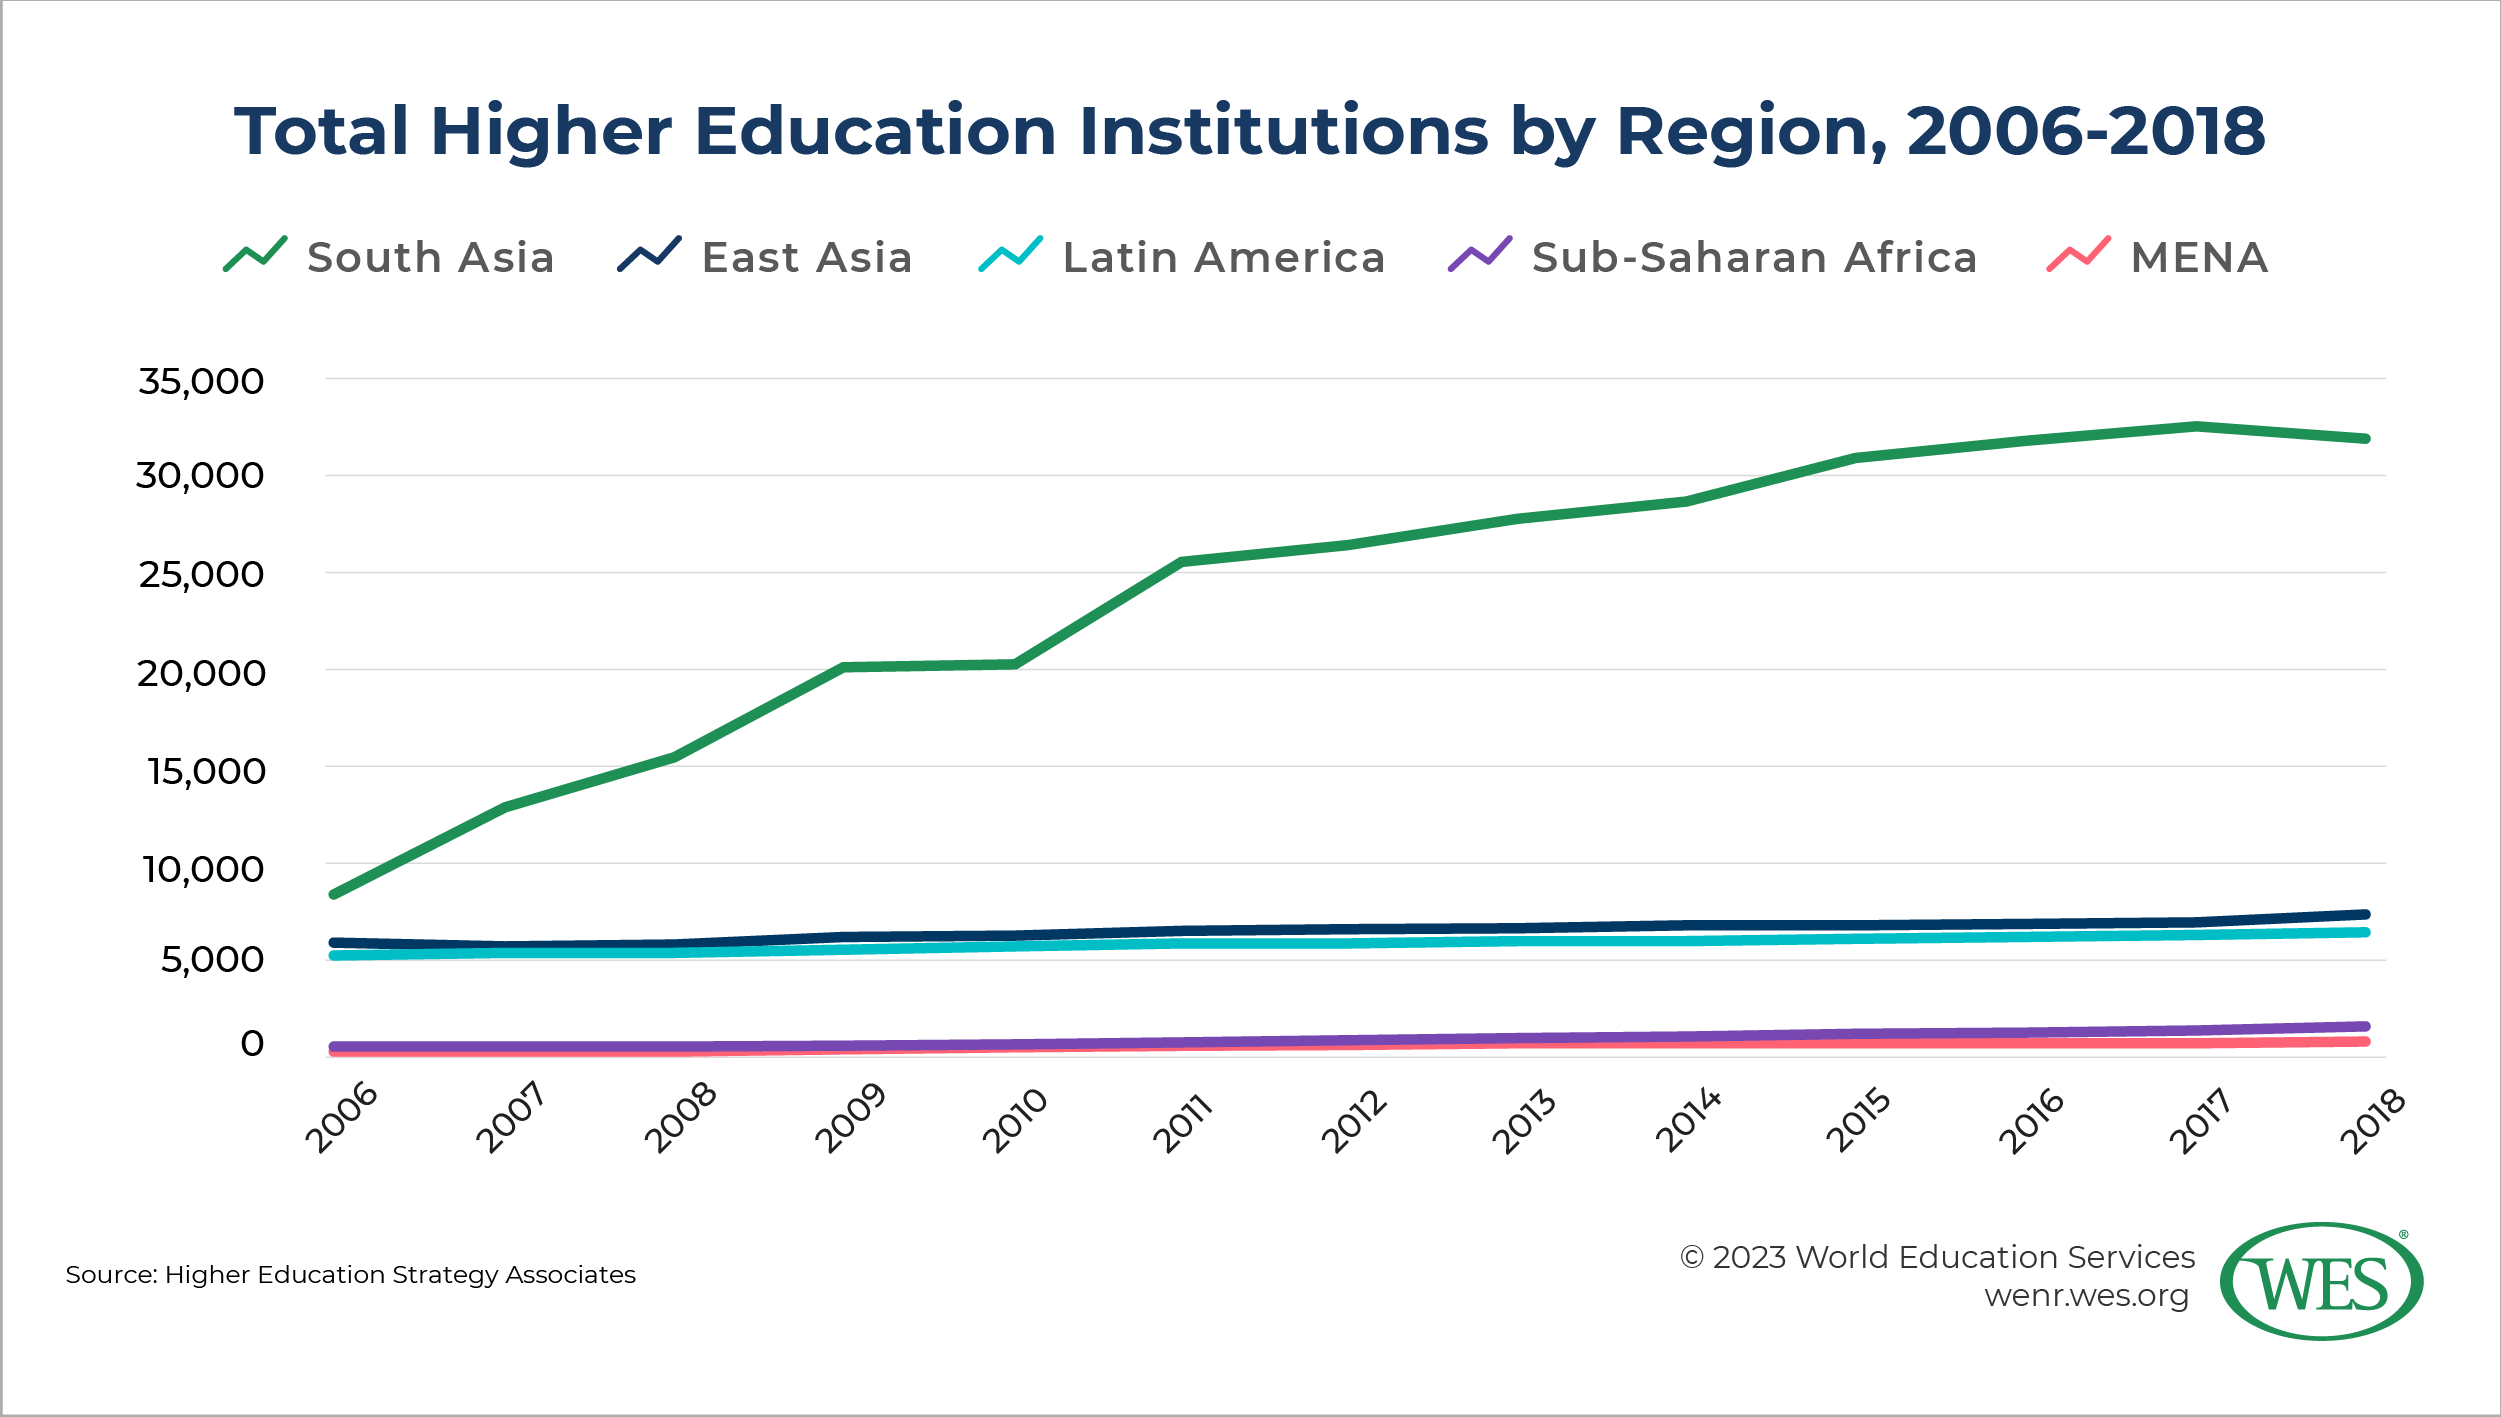 Number of higher education institutions in different world regions, 2006-2018. The chart reflects the strongest growth of higher education institutions in South Asia. 